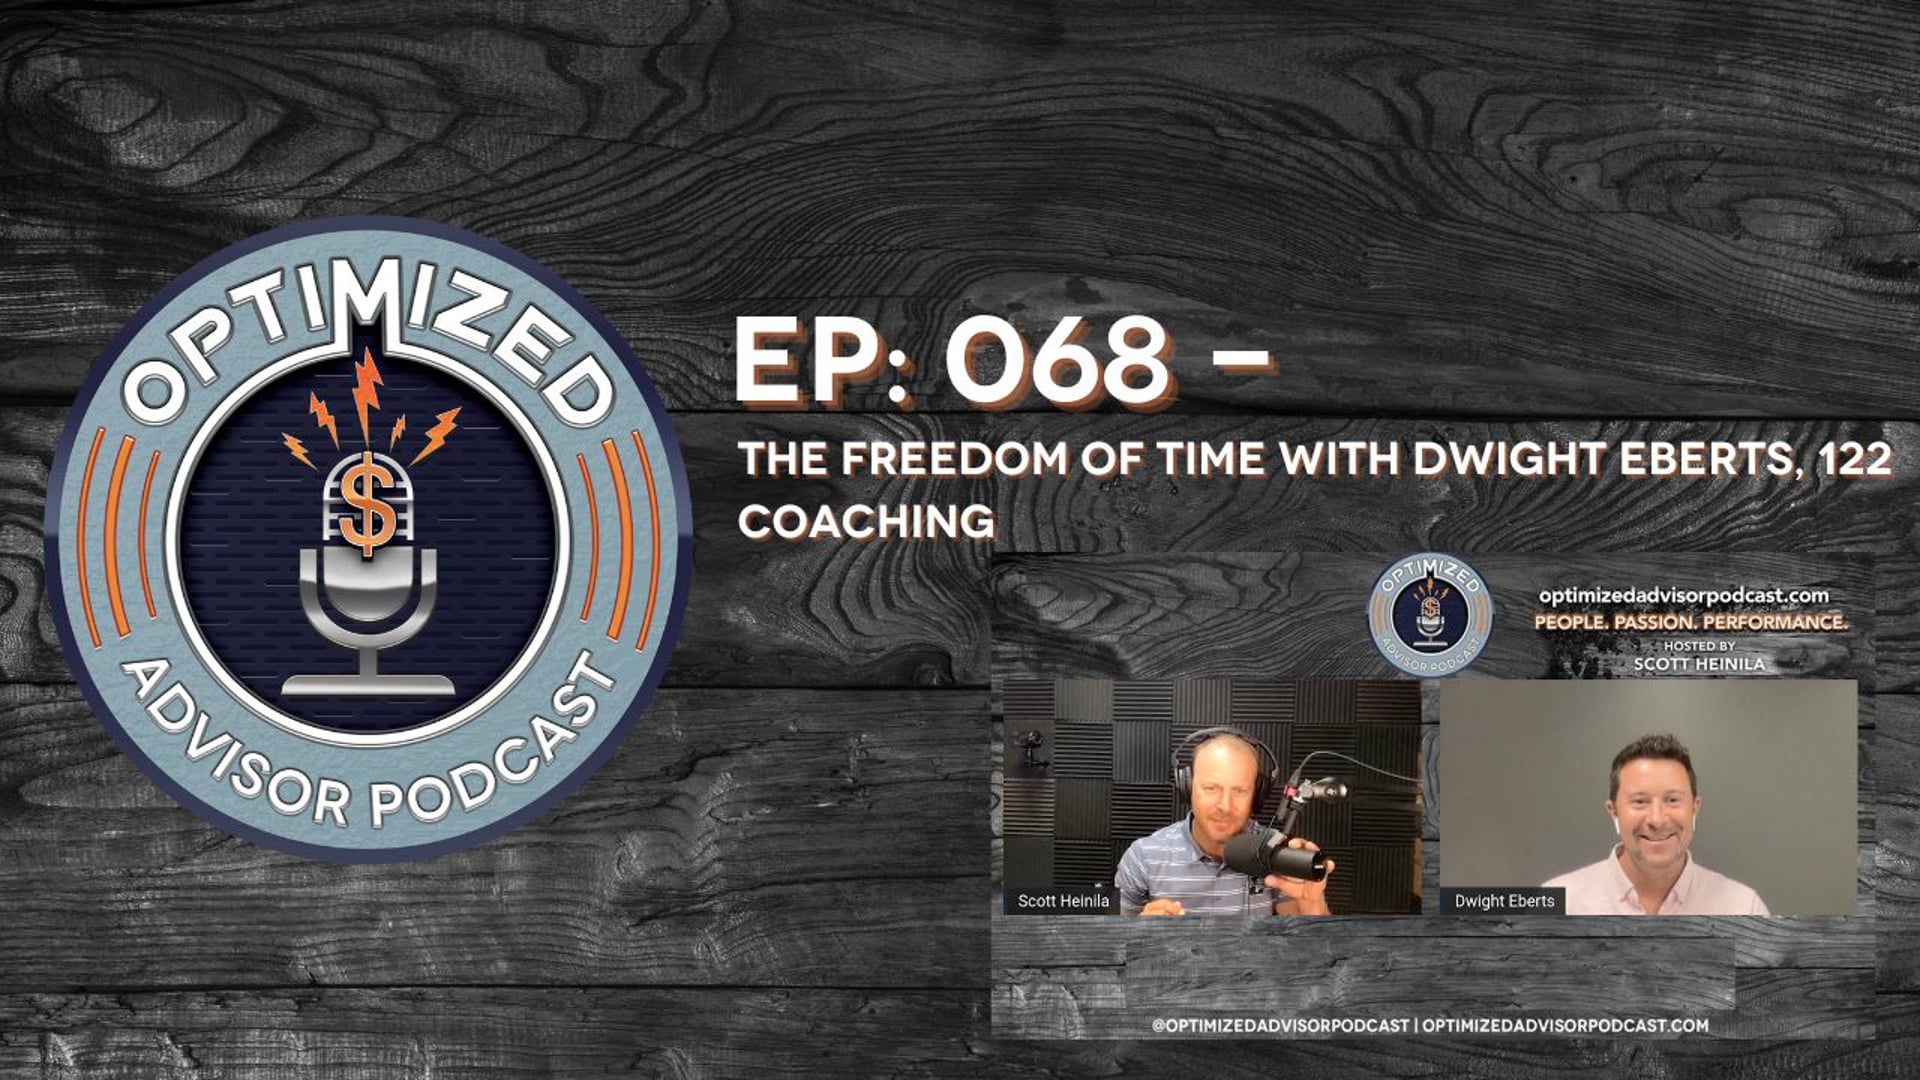 The Freedom of Time with Dwight Eberts, Coaching 122